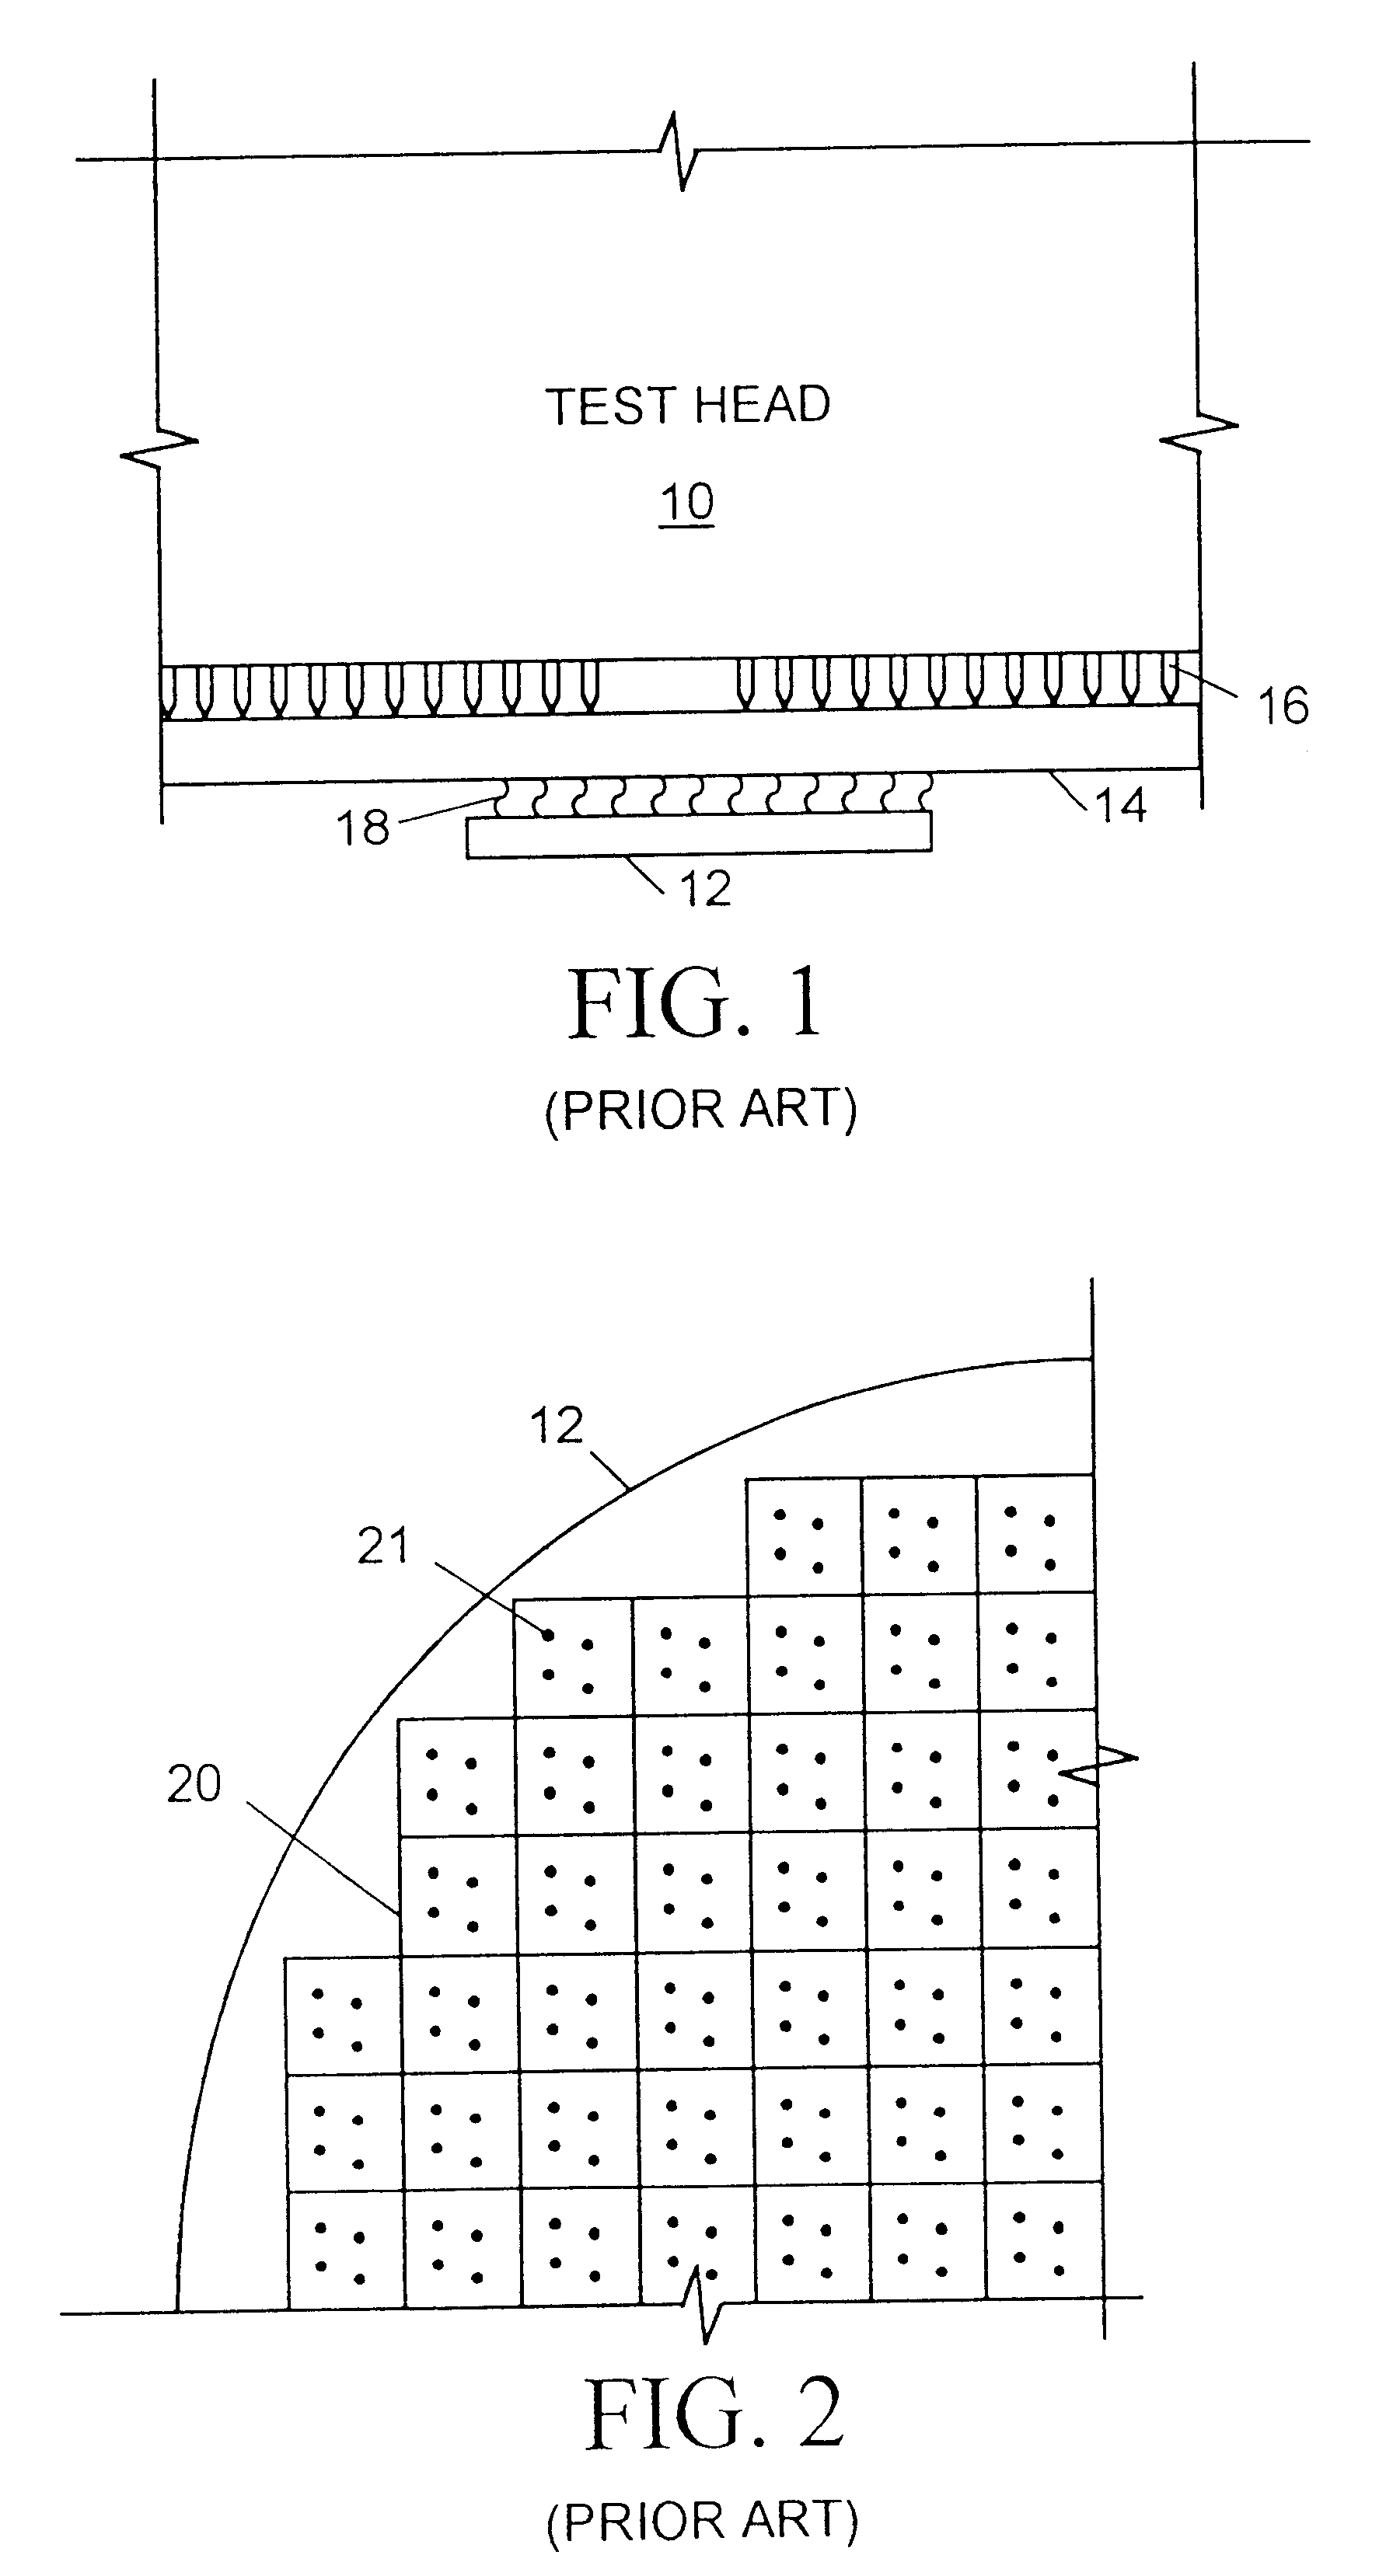 Method for testing signal paths between an integrated circuit wafer and a wafer tester